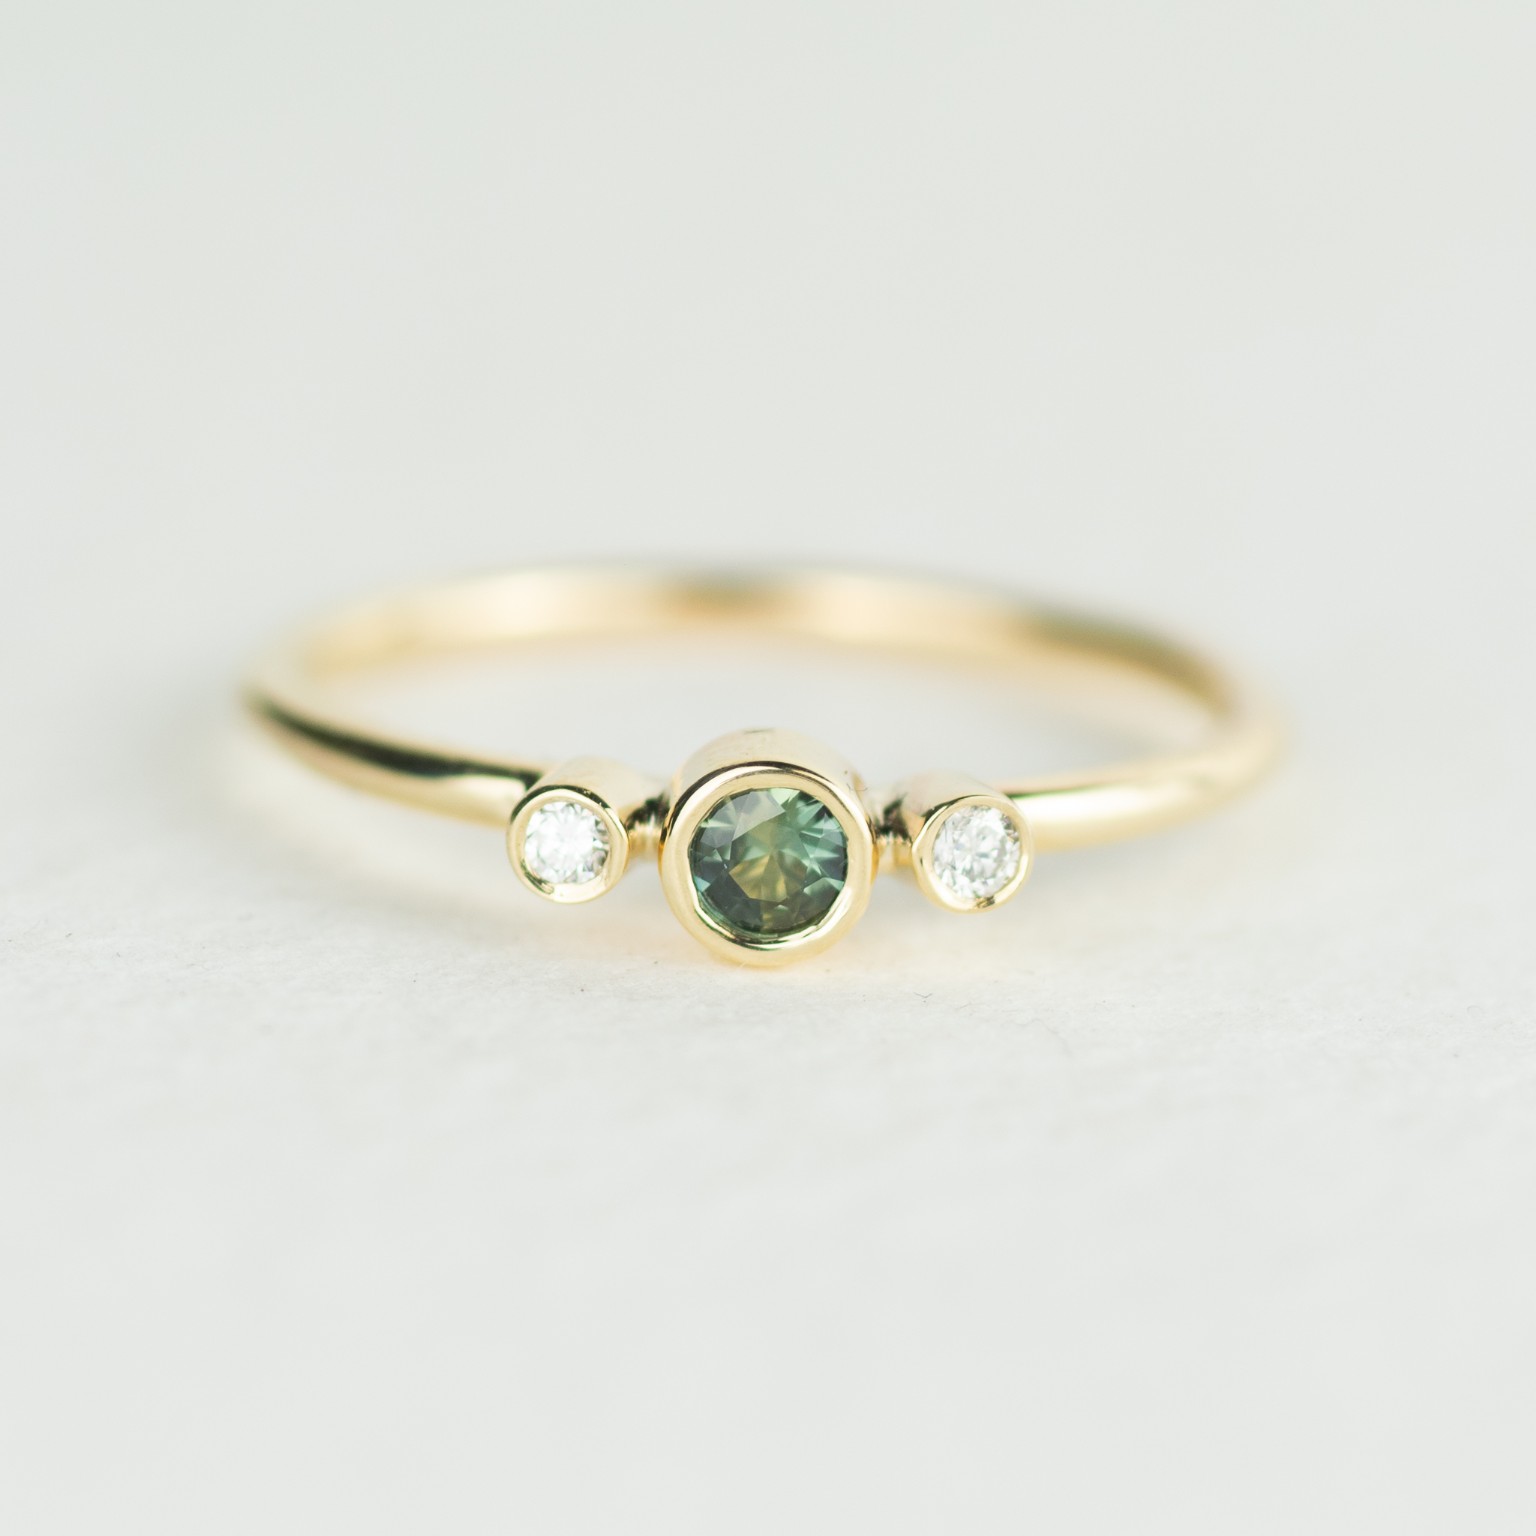 Andromeda Trilogy ring from Alison Moore Designs